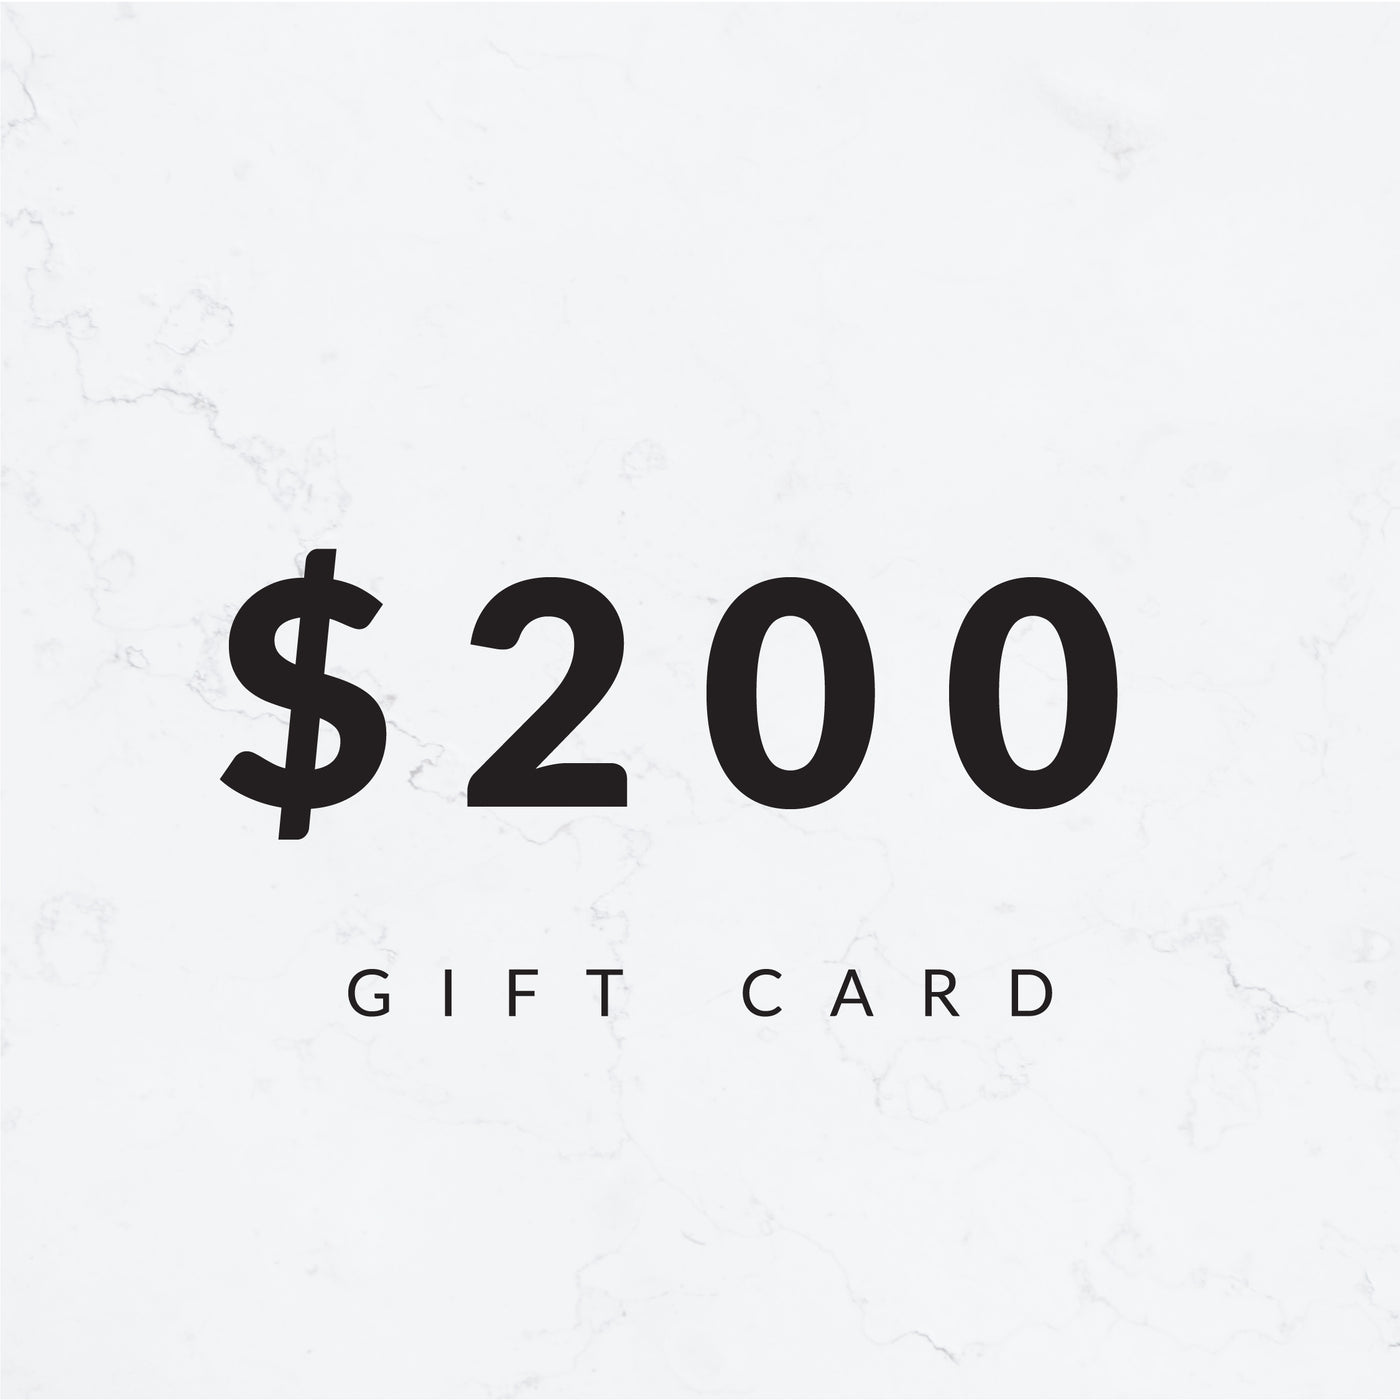 Paul Taylor Jewellers Gift Cards